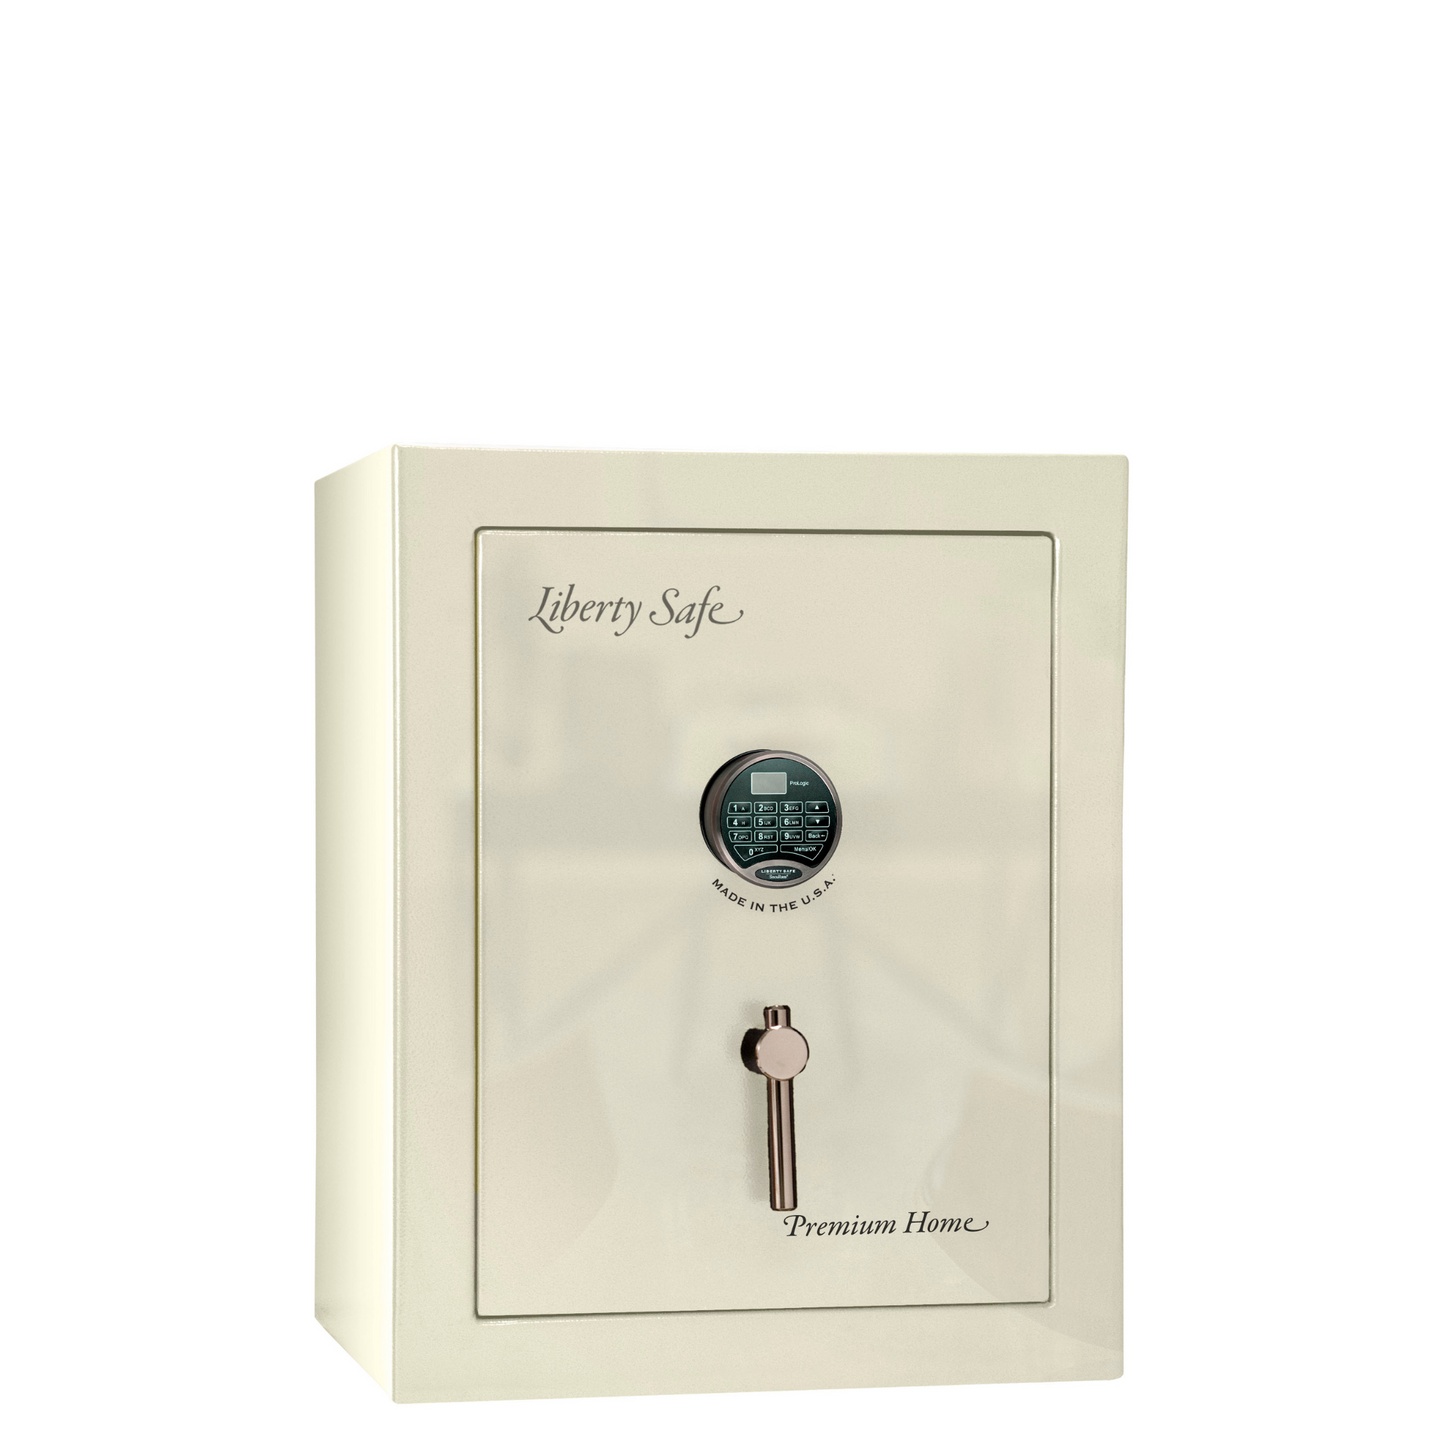 Premium Home Series | Level 7 Security | 2 Hour Fire Protection | 08 | Dimensions: 29.75"(H) x 24.5"(W) x 19"(D) | White Marble - Closed Door